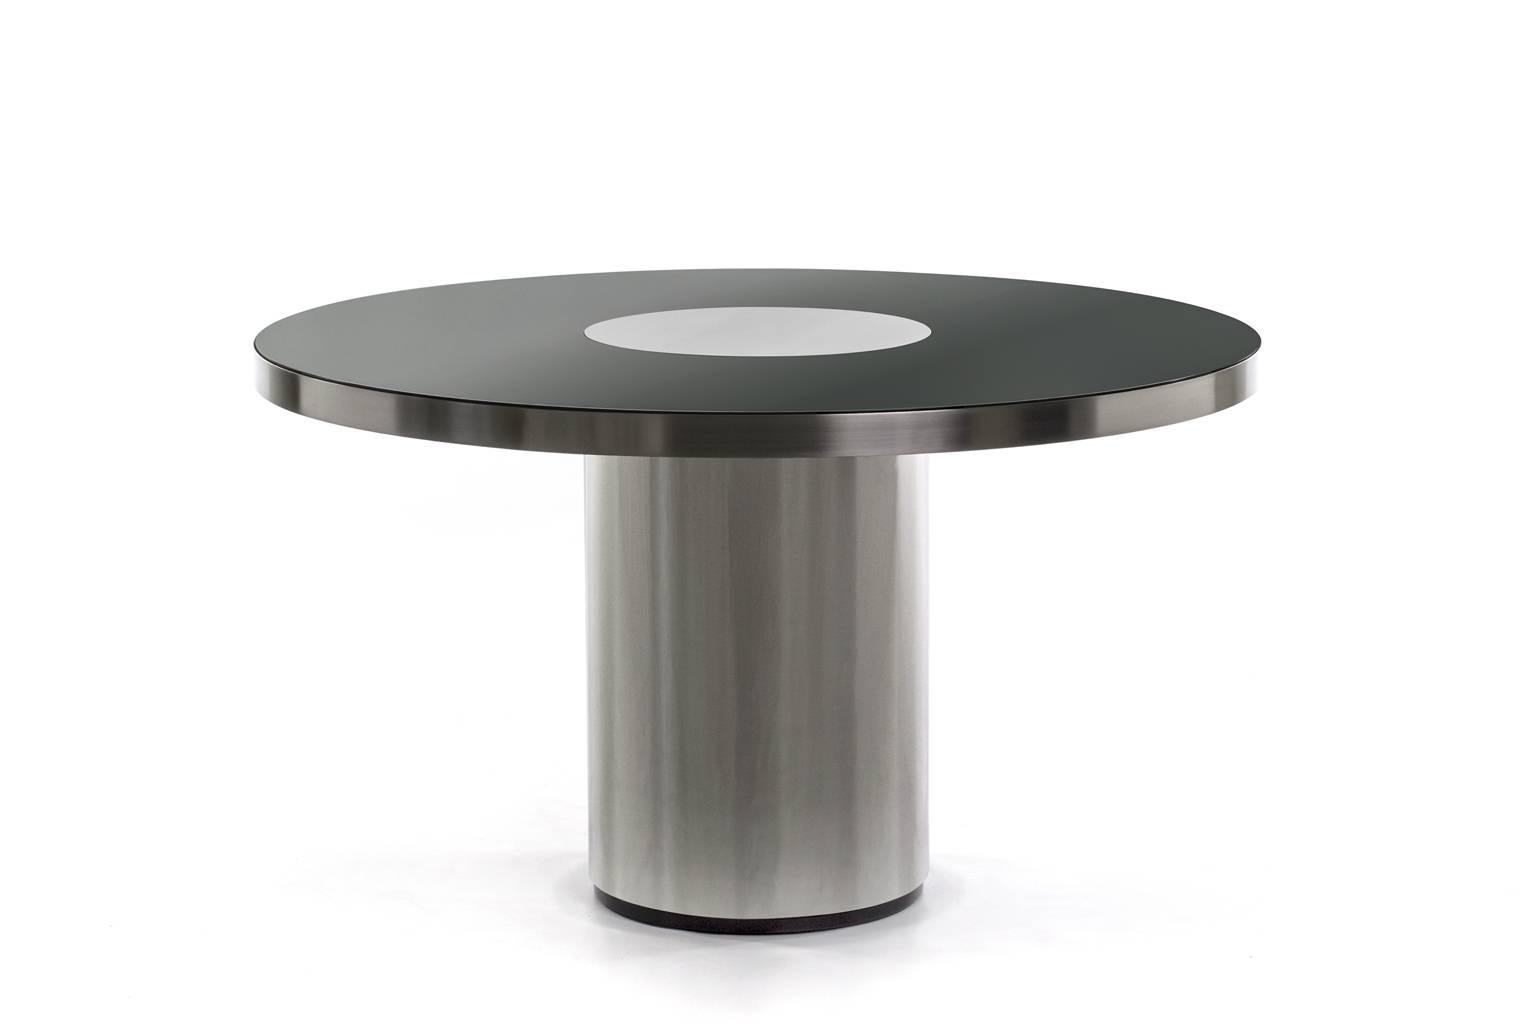 Amazing round dining table in style of Willy Rizzo, Italy, 1970s. Sleek and Chic design out of excellent craftsmanship. Beautiful combination of the highest quality materials: Brushed steel edges, high gloss polished stainless steel base and middle